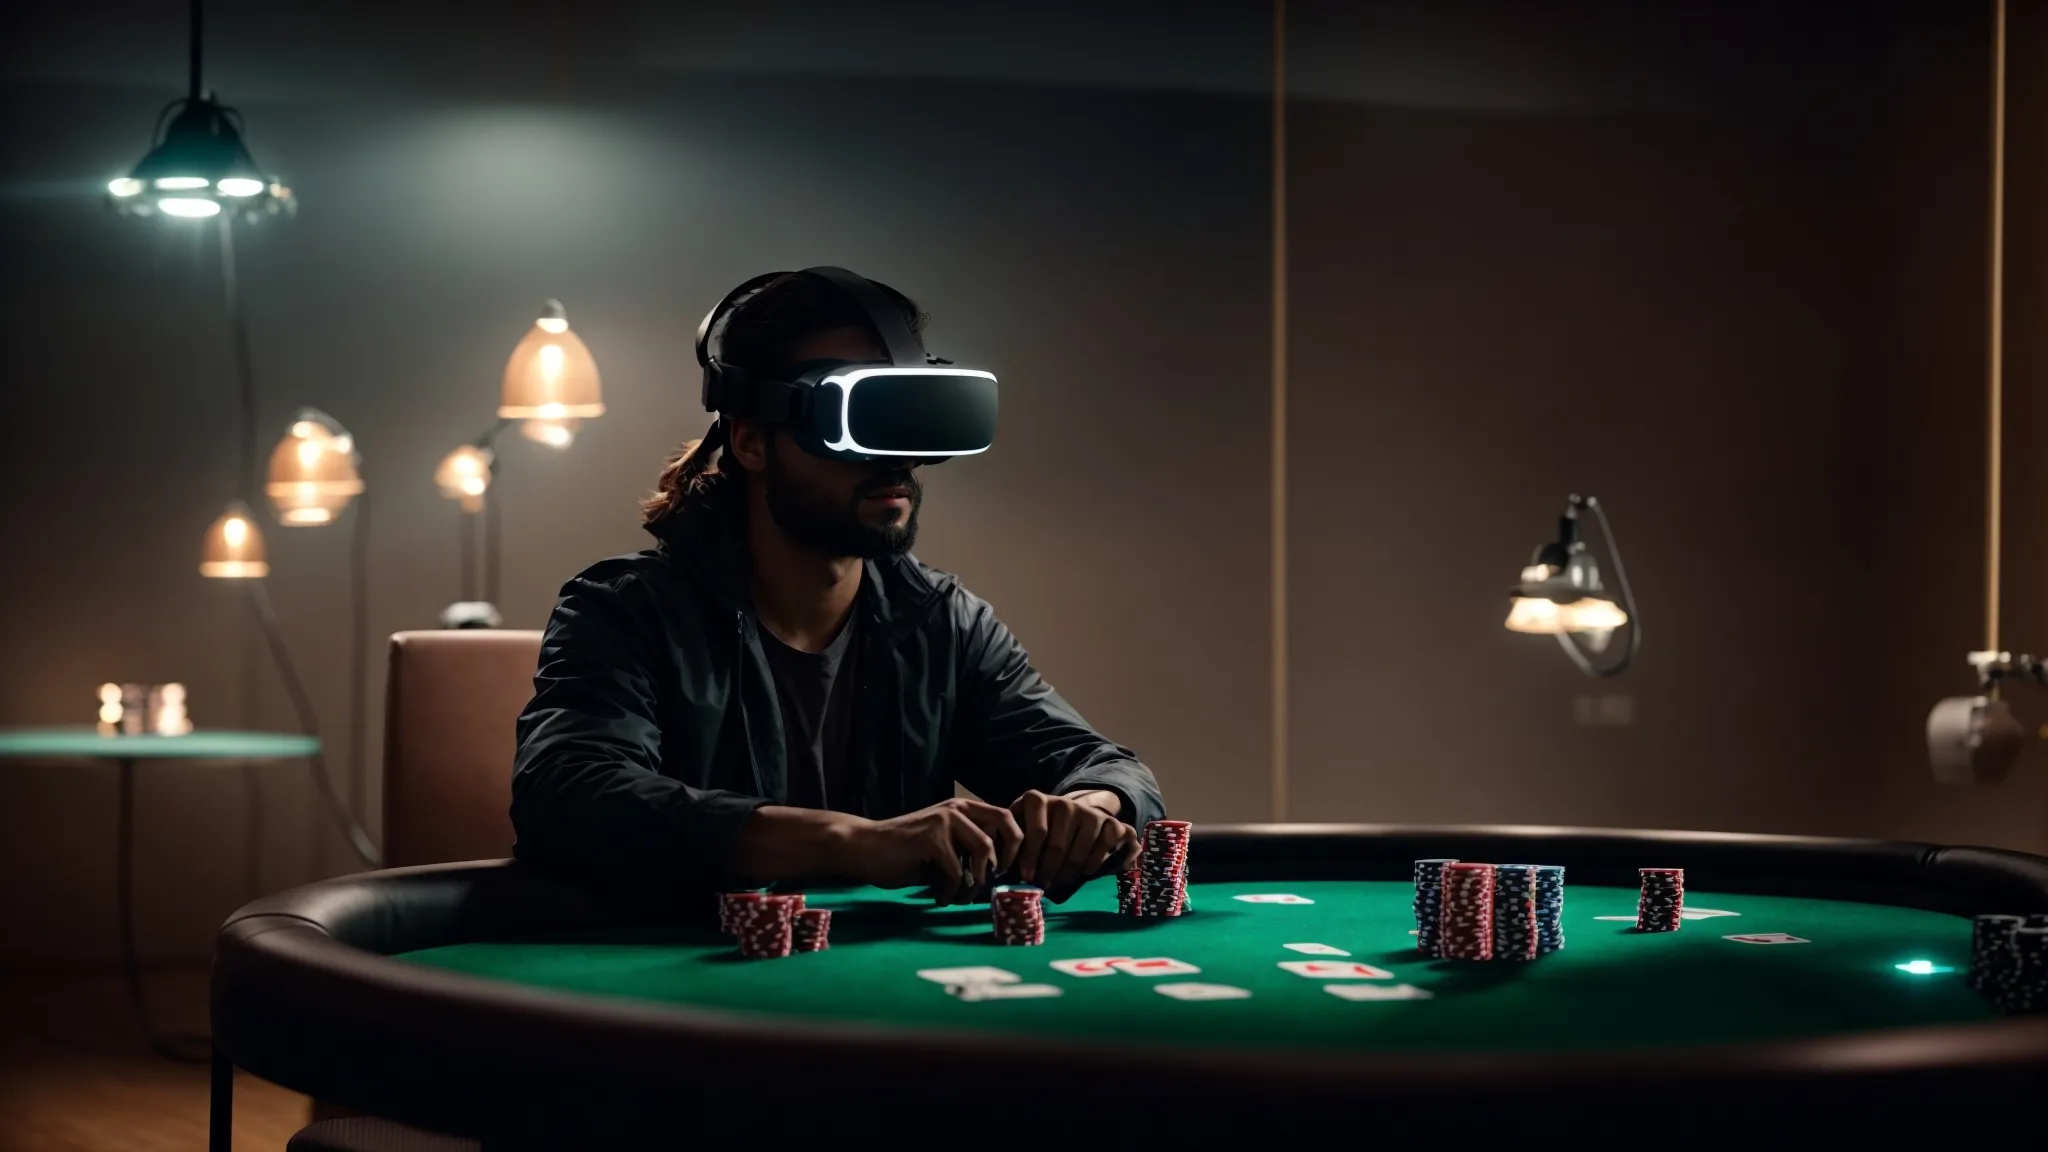 a person immersed in vr gear sits at a virtual poker table, with the glow of the screen illuminating an otherwise dim room.